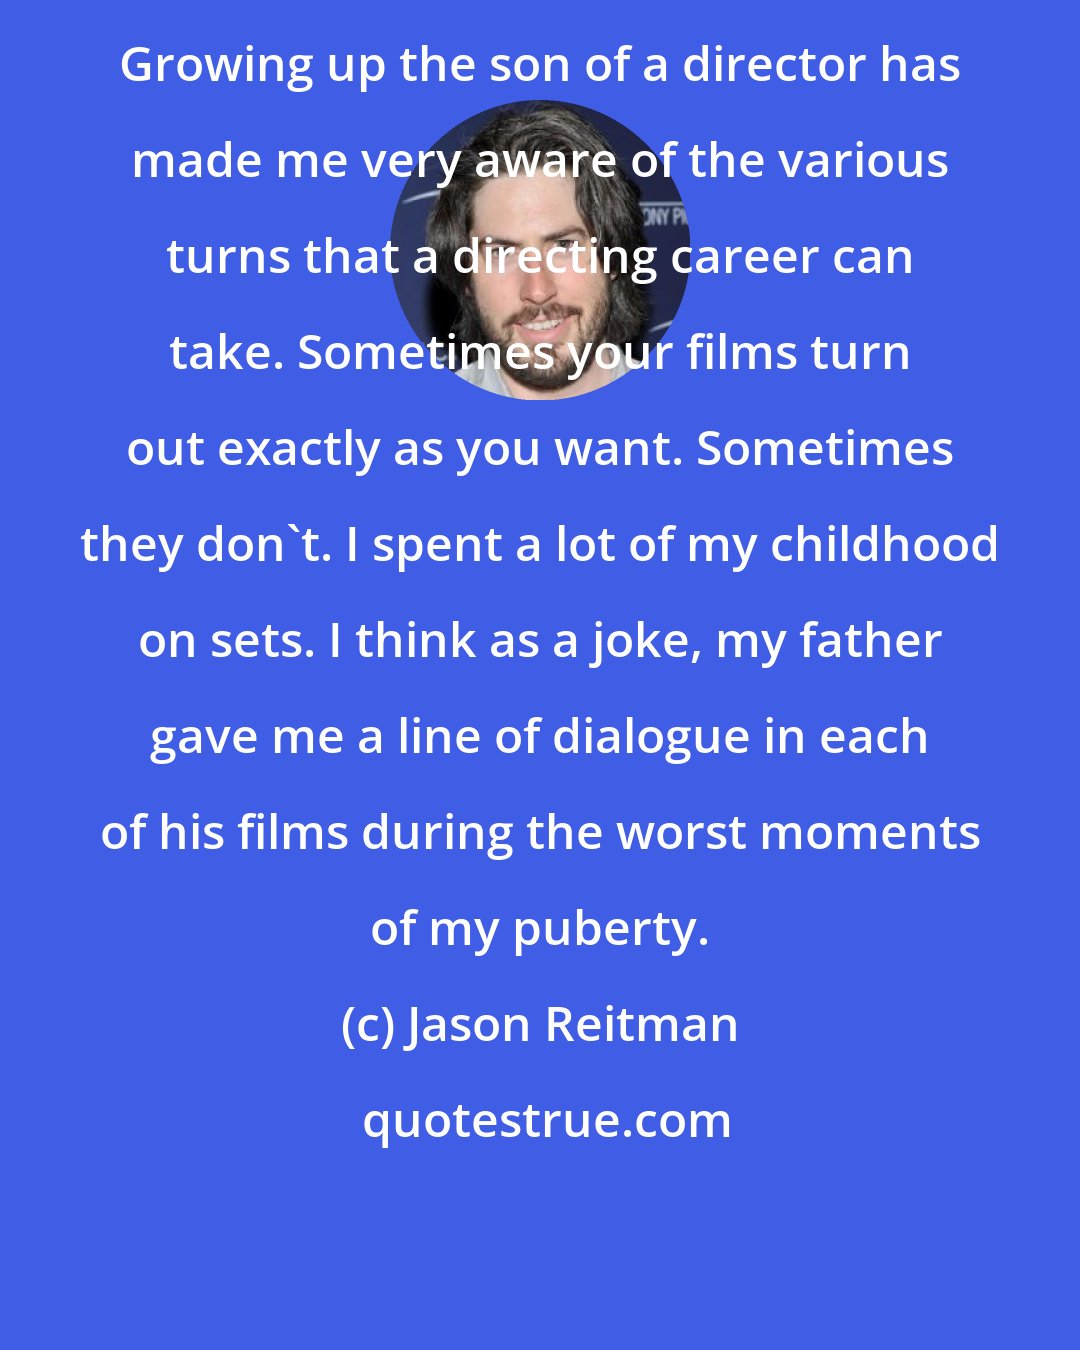 Jason Reitman: Growing up the son of a director has made me very aware of the various turns that a directing career can take. Sometimes your films turn out exactly as you want. Sometimes they don't. I spent a lot of my childhood on sets. I think as a joke, my father gave me a line of dialogue in each of his films during the worst moments of my puberty.